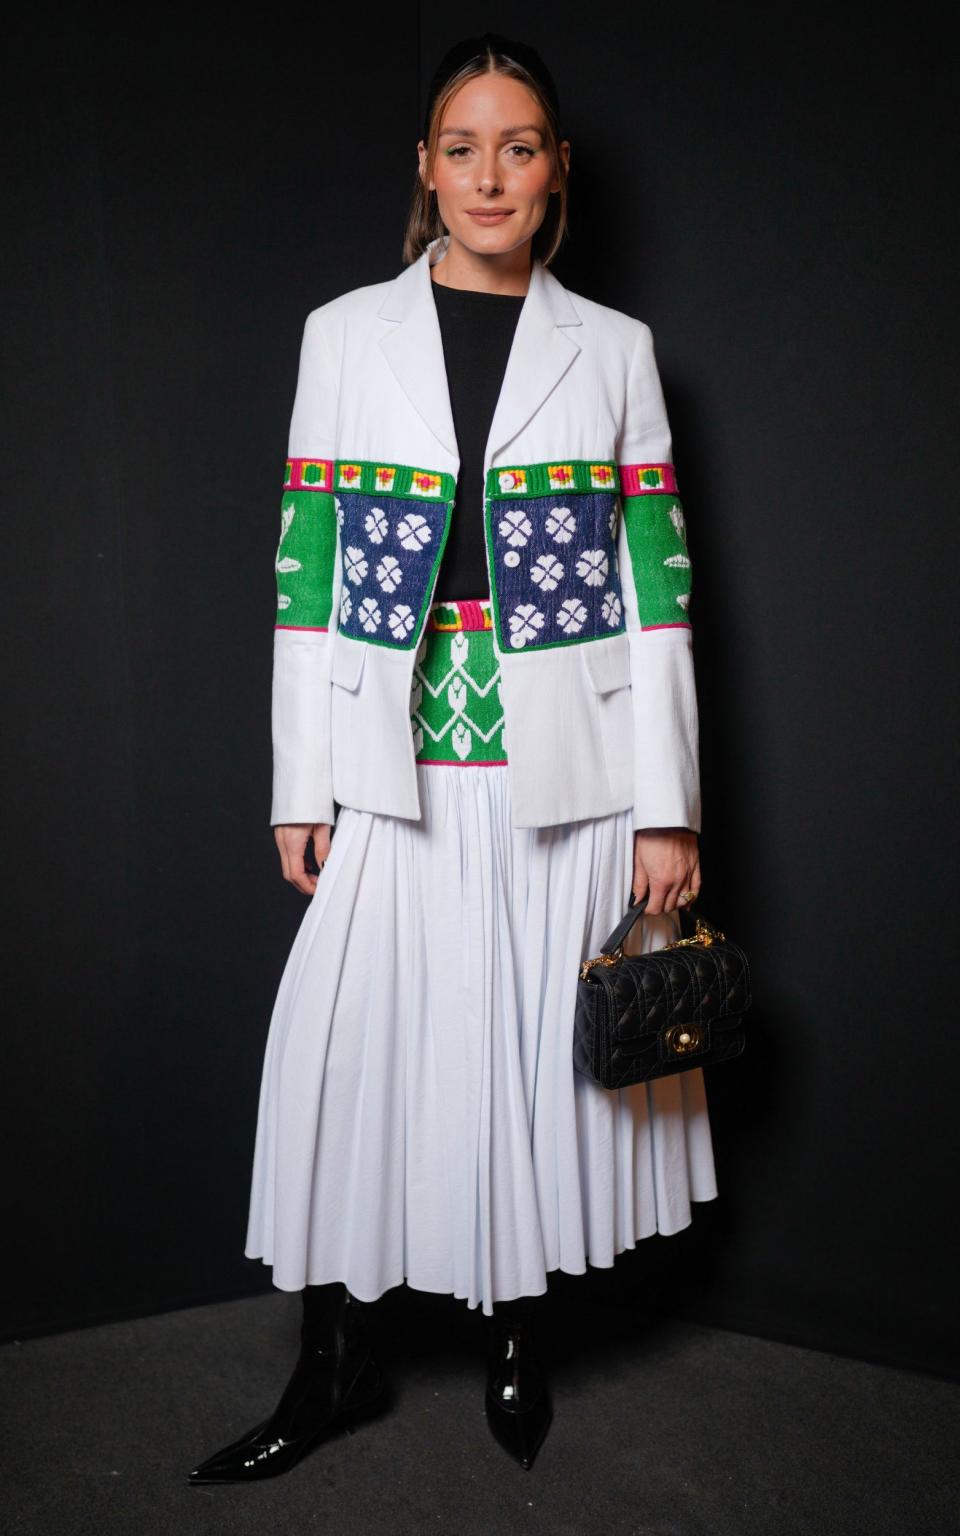 Olivia Palermo wears an indigenously inspired skirt suit from Dior at the Paris Fashion Week show in February